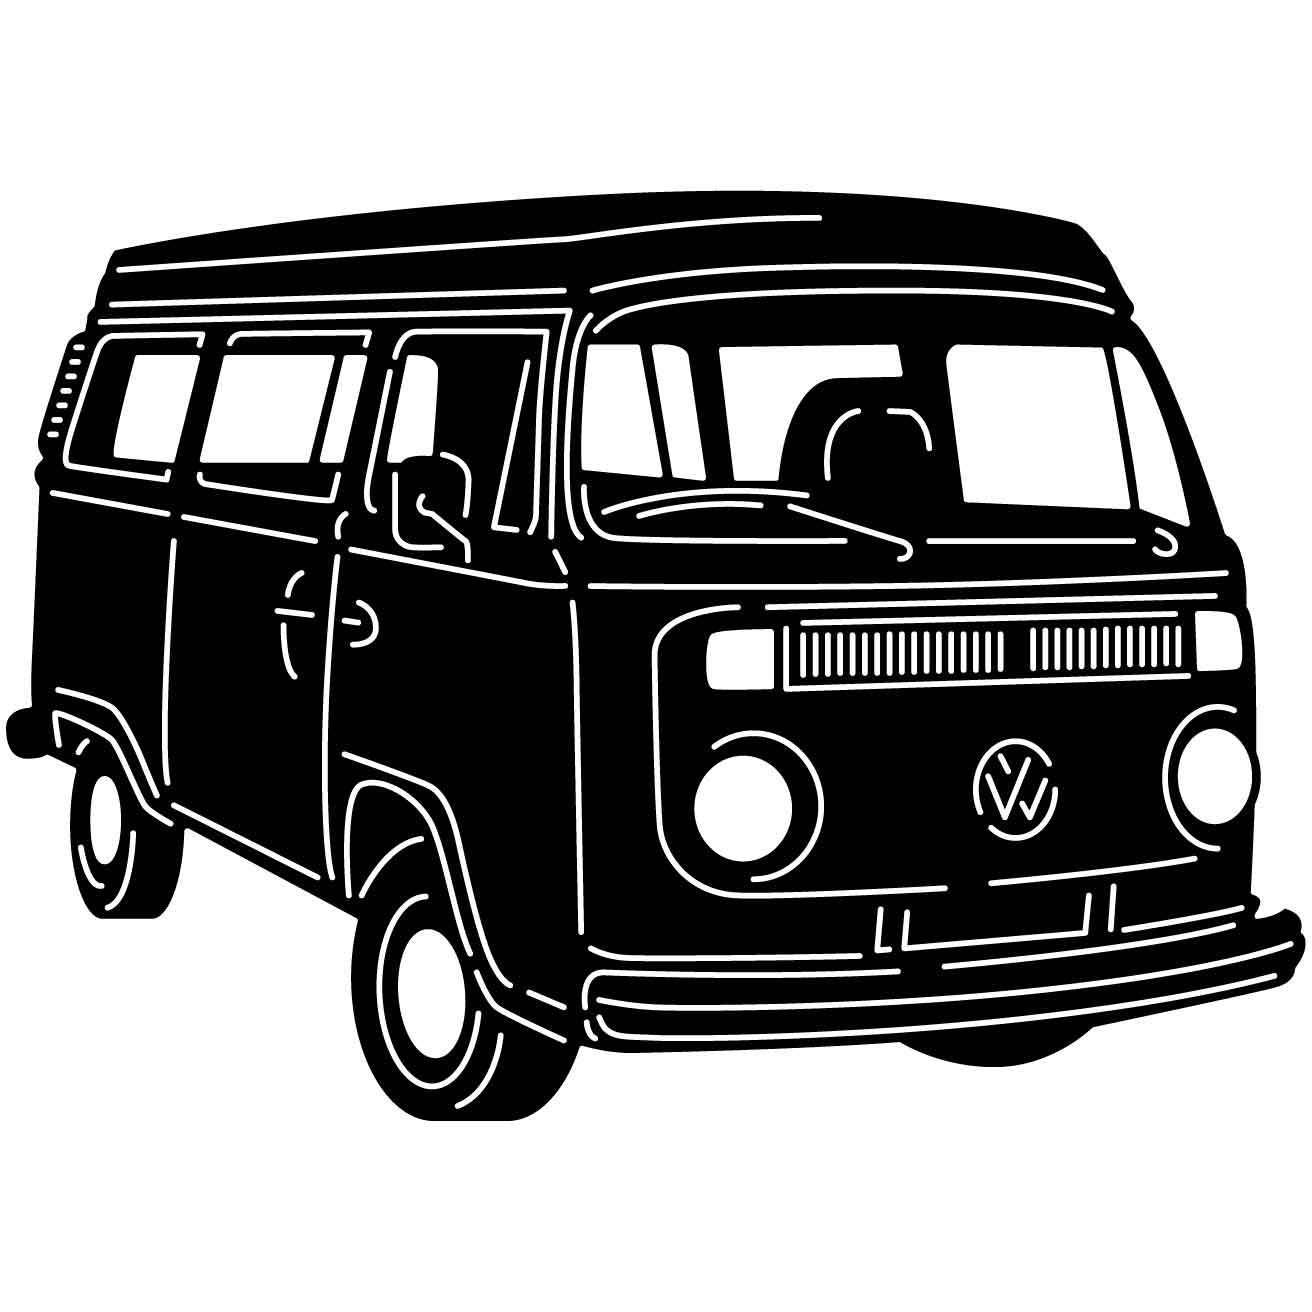 VW Combi 06 DXF File Cut Ready for CNC